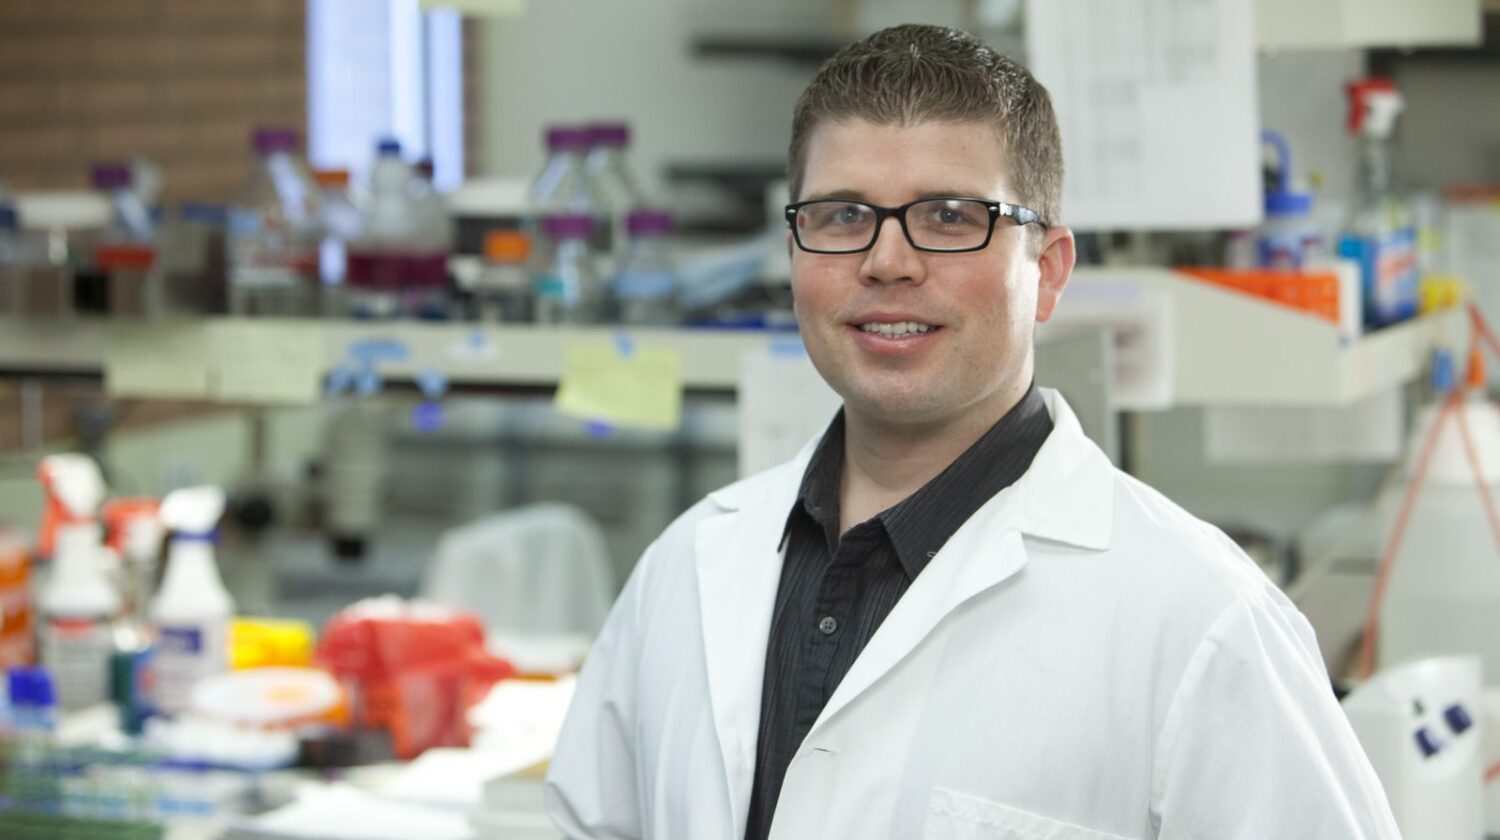 Sean Curran to Receive Busse Research Award